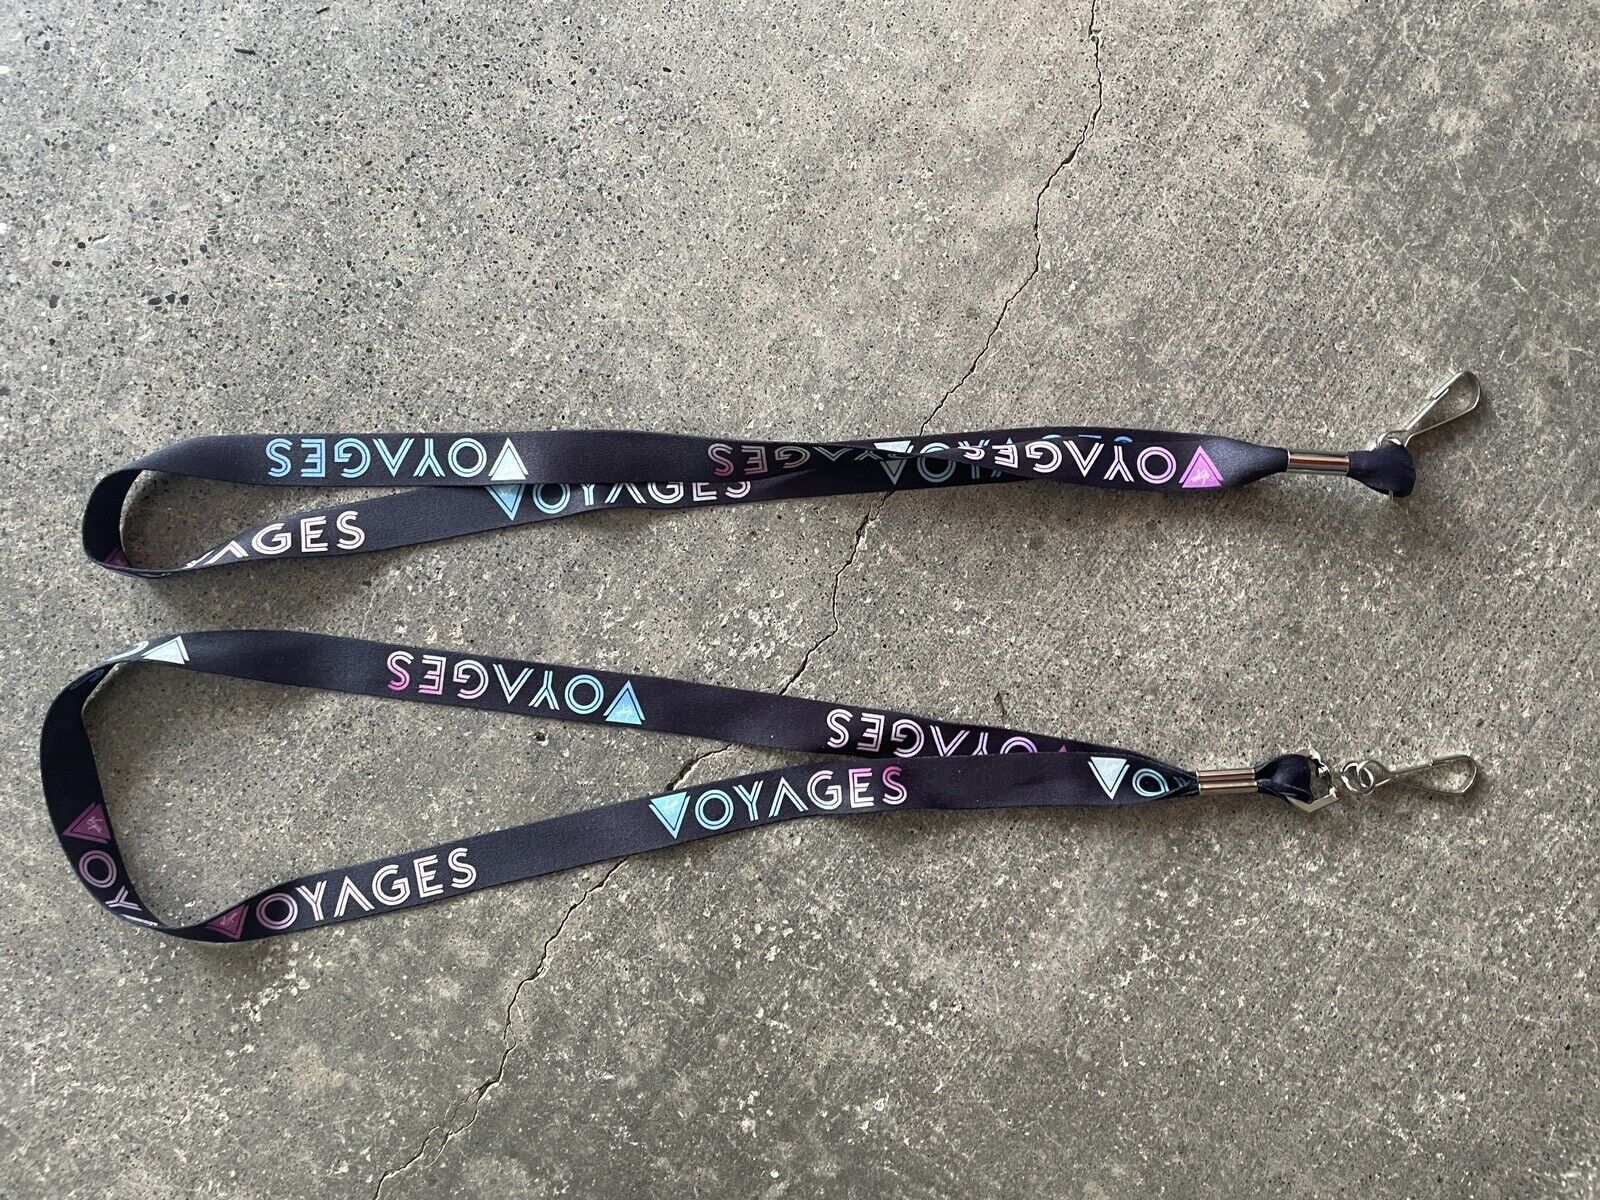 Virgin Voyages Cruise Lanyard, Behind The Scenes Tour, Keychain